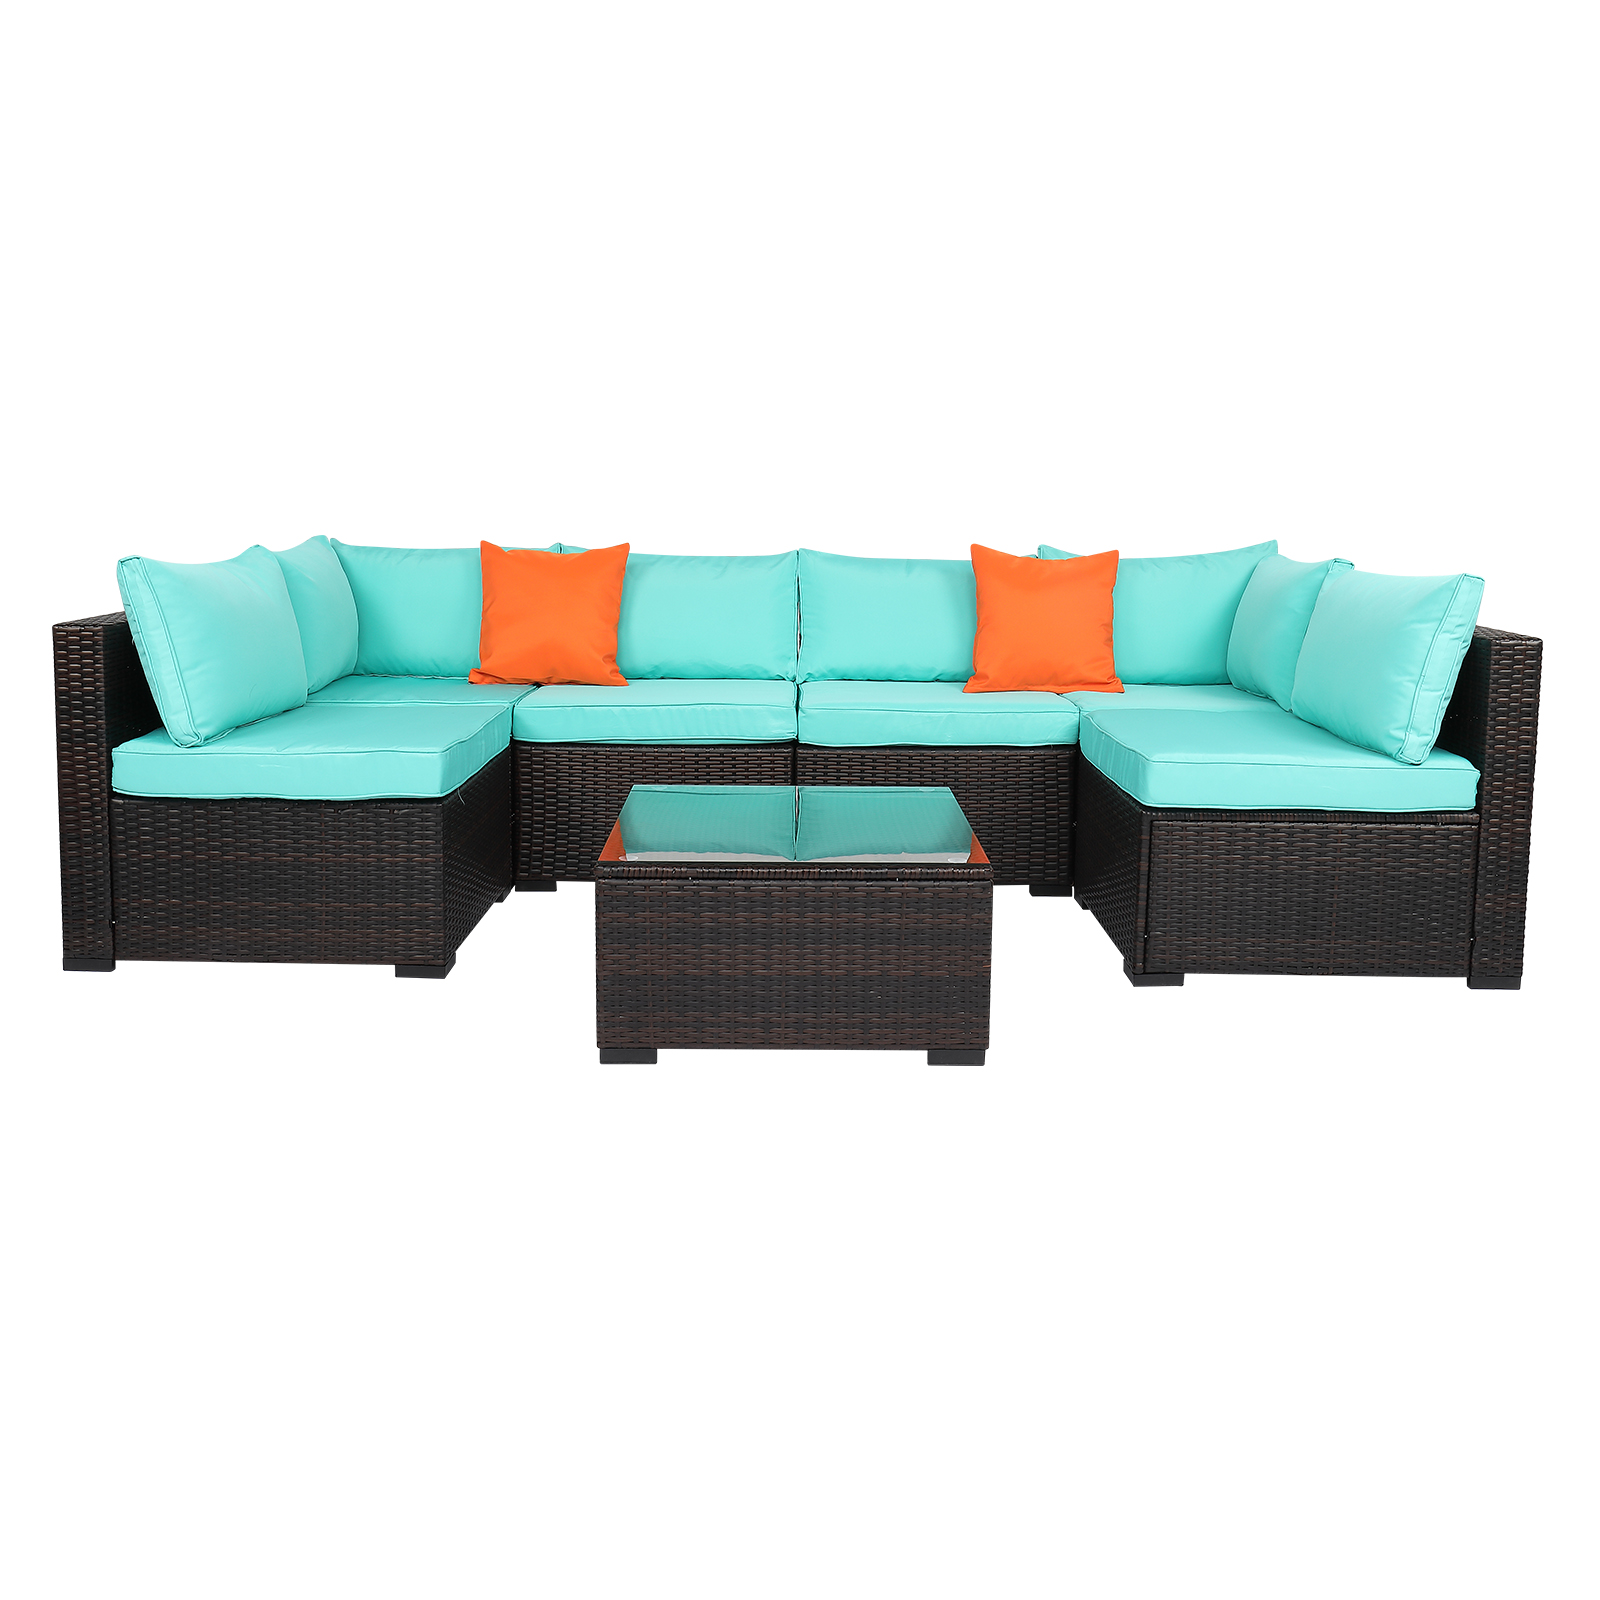 Clearance! Patio Outdoor Furniture Sets, 7 Pieces All-Weather Rattan Sectional Sofa with Tea Table, Cushions & Pillow, PE Rattan Wicker Sofa Couch Conversation Set for Garden Backyard Poolside, B441 - image 1 of 10